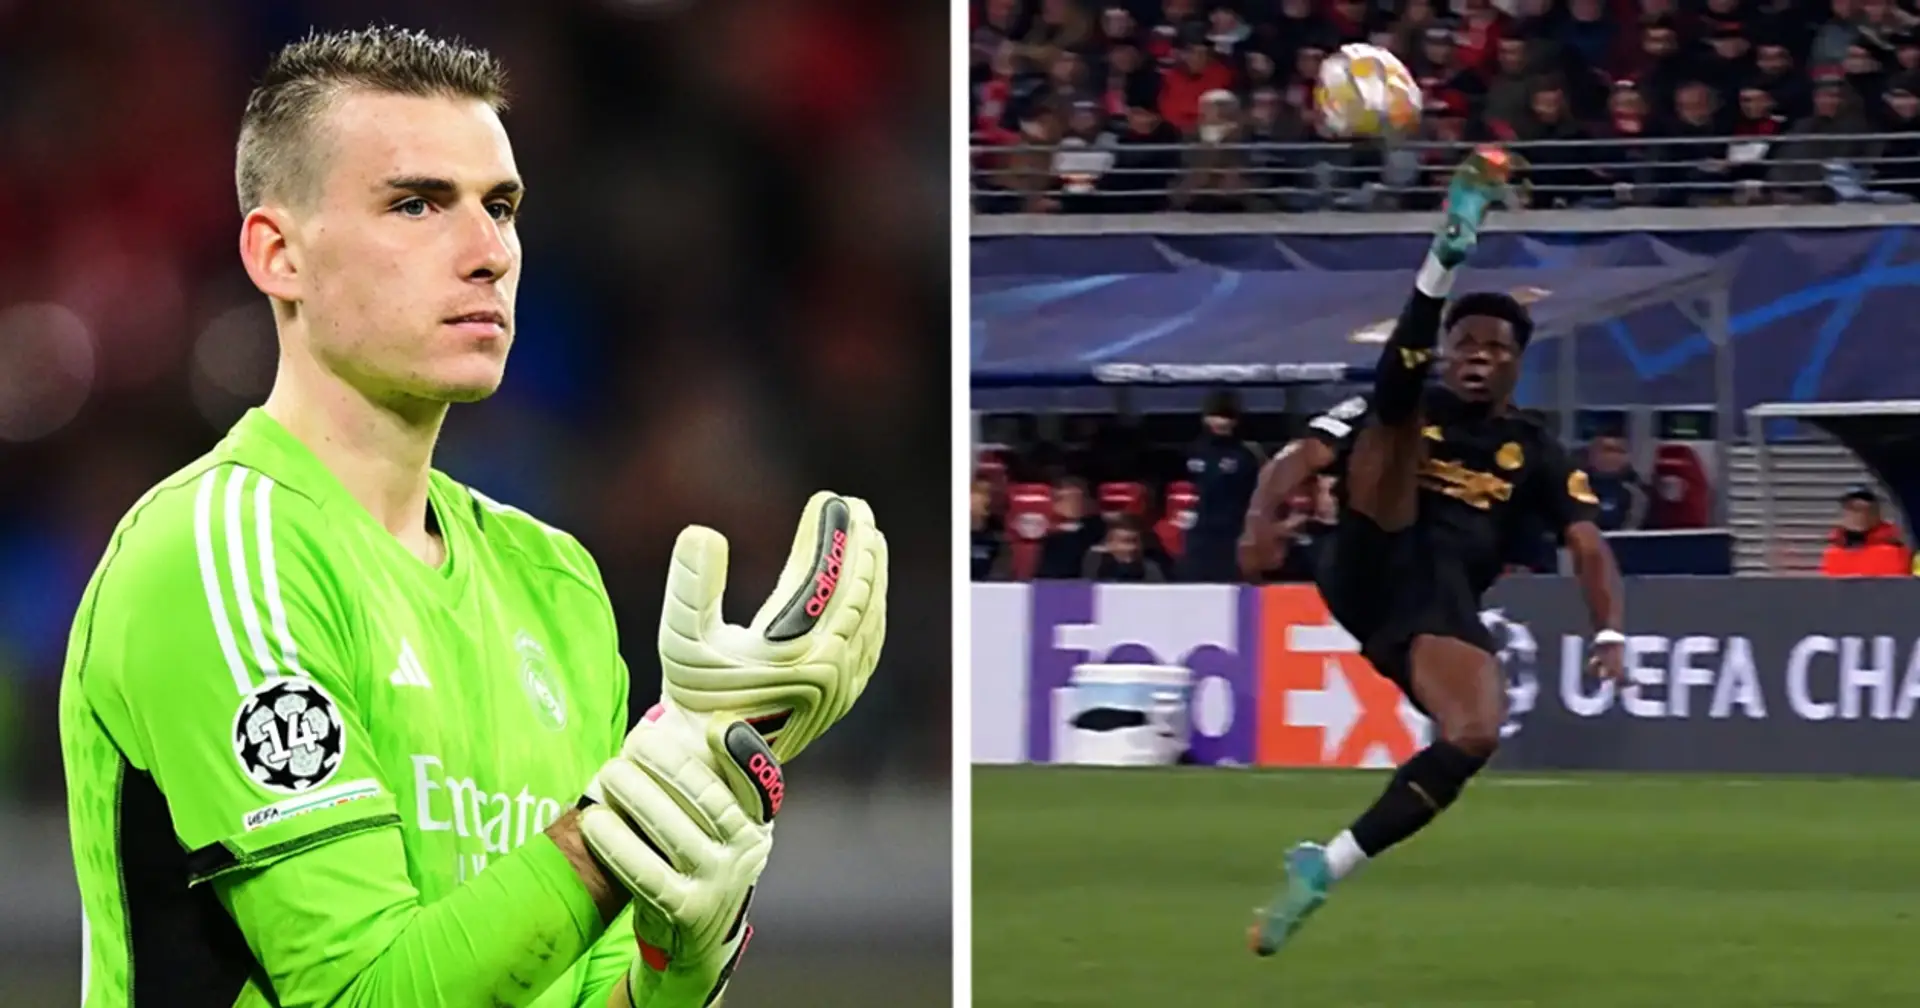 In a spectacular jump: how Tchouameni saved Lunin from a one-on-one in the Leipzig match